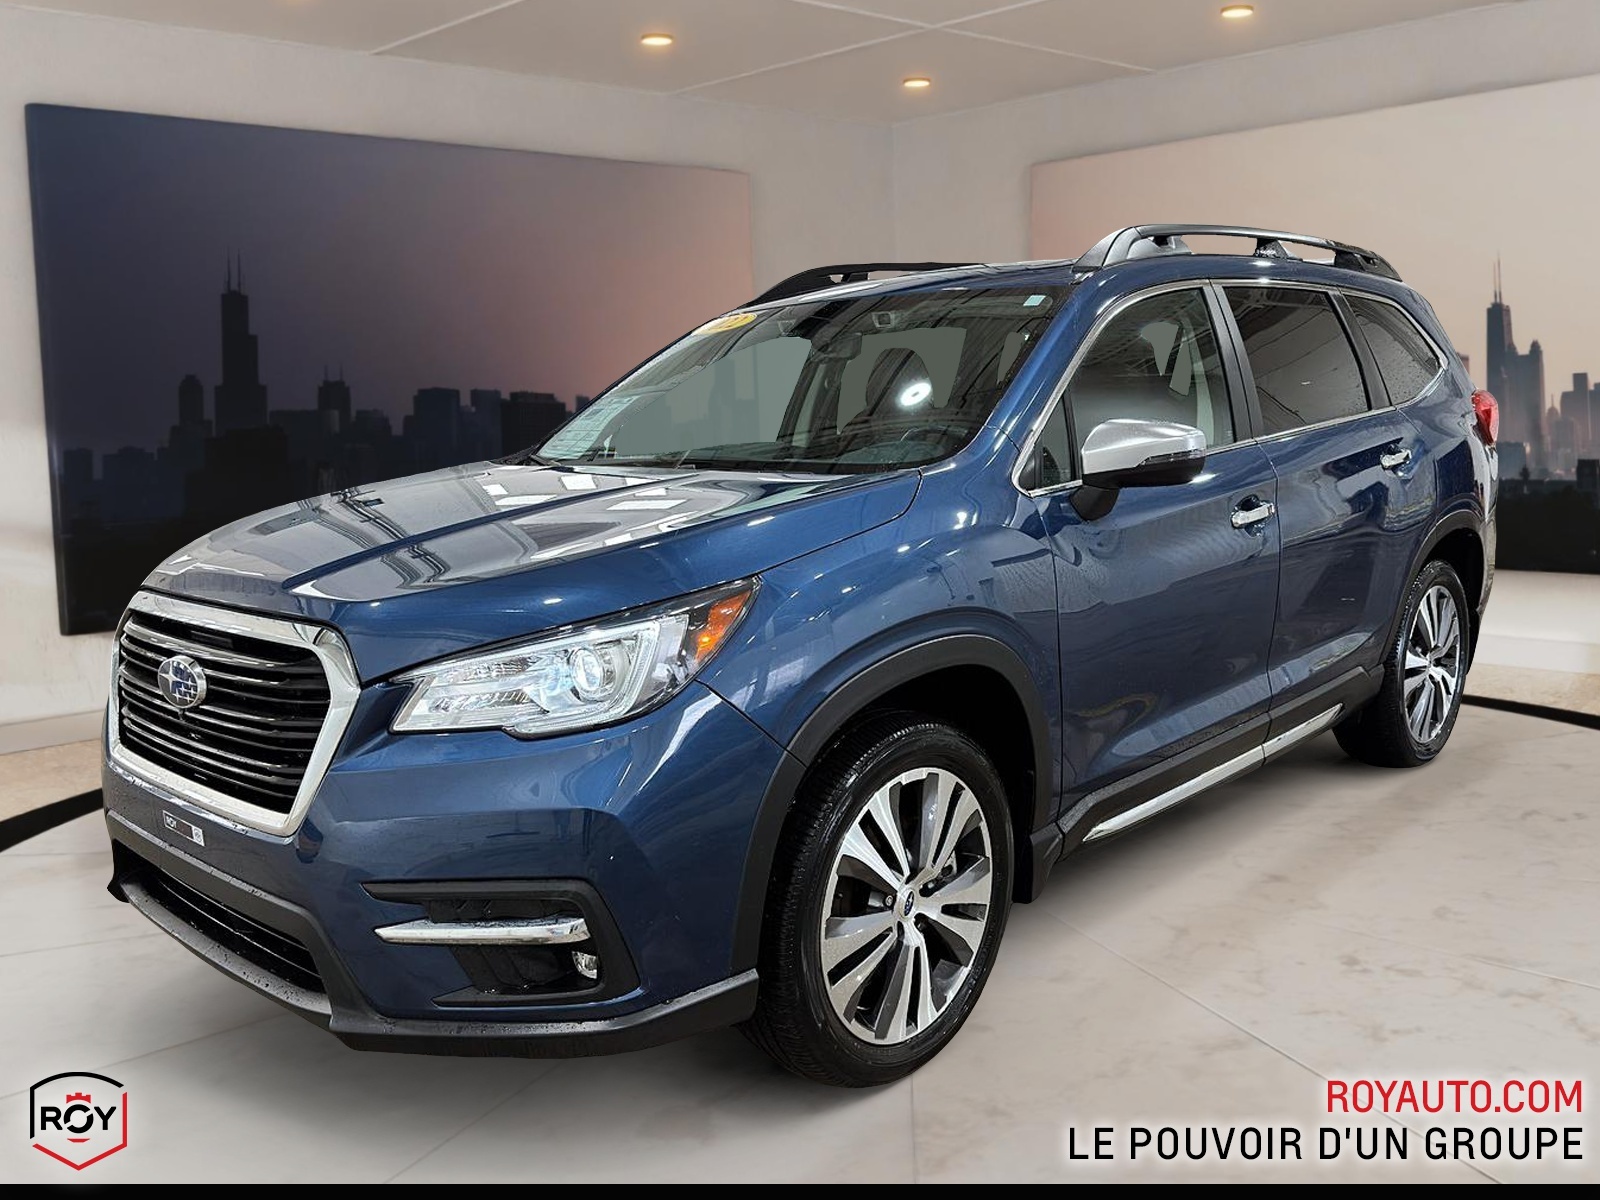 2022 Subaru Ascent AWD | Angles morts | Cuir | Toit Panoramique